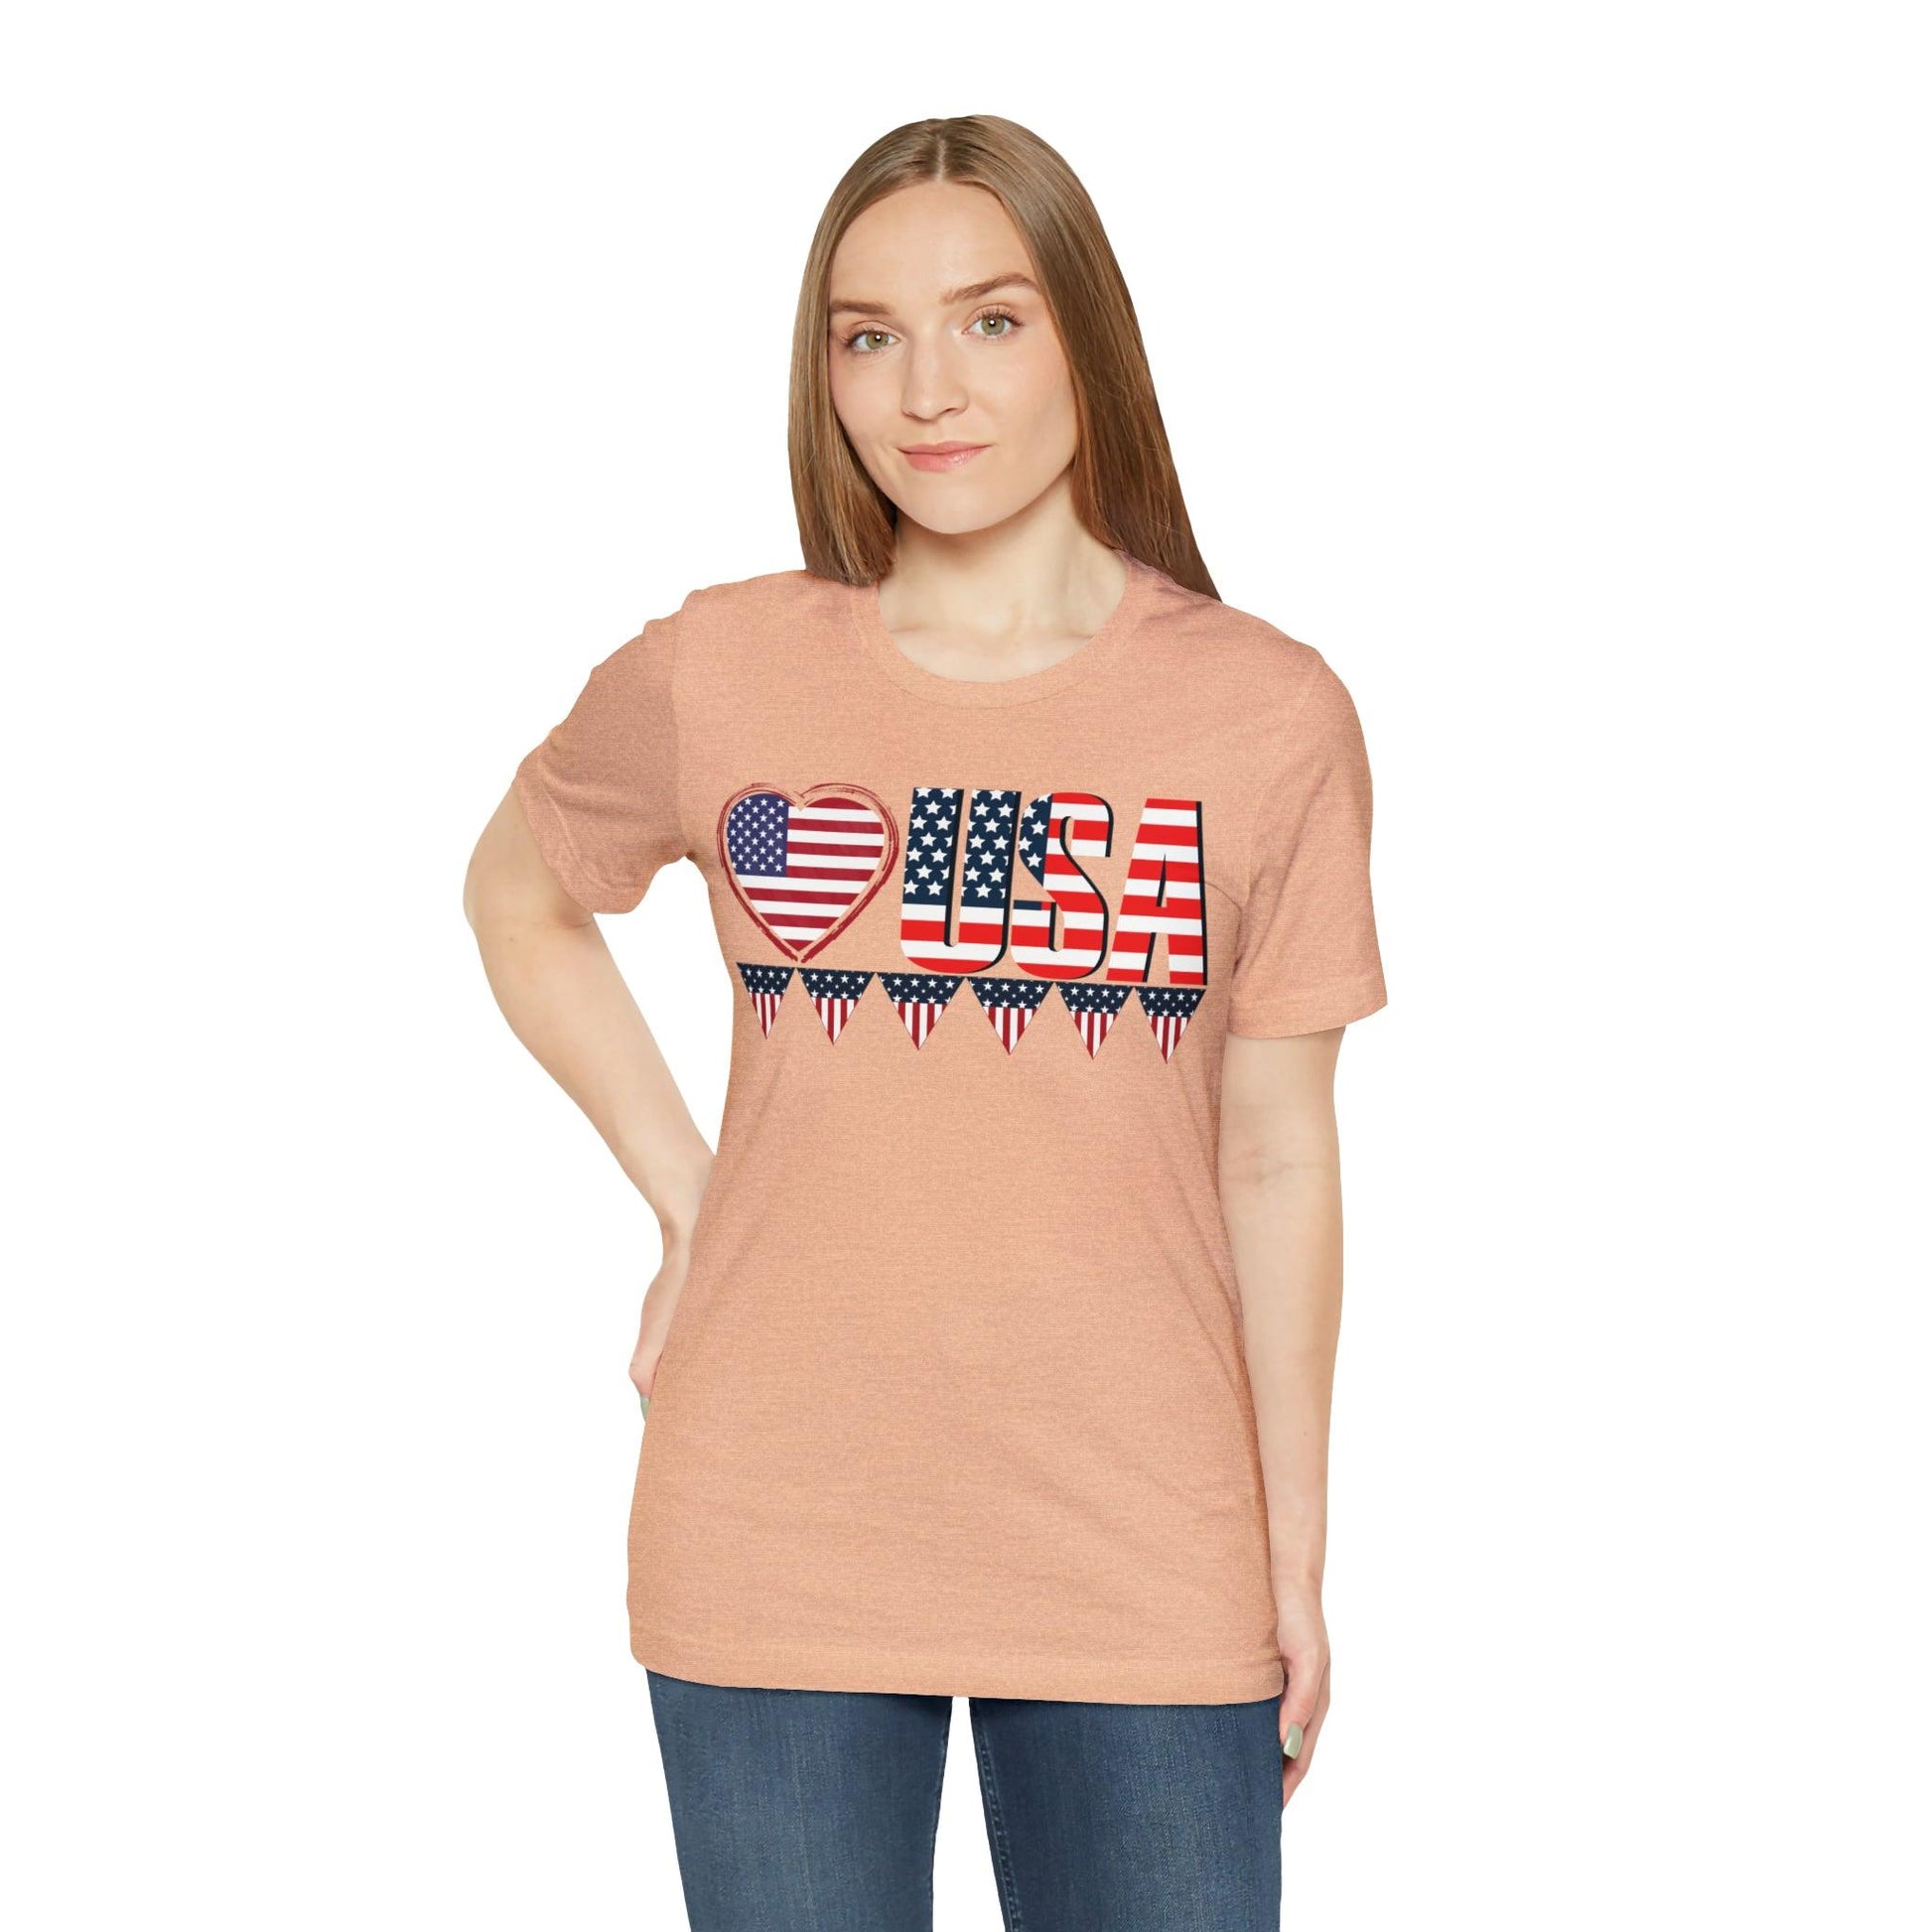 Love USA American flag shirt, Red, white, and blue shirt, 4th of July shirt - Giftsmojo